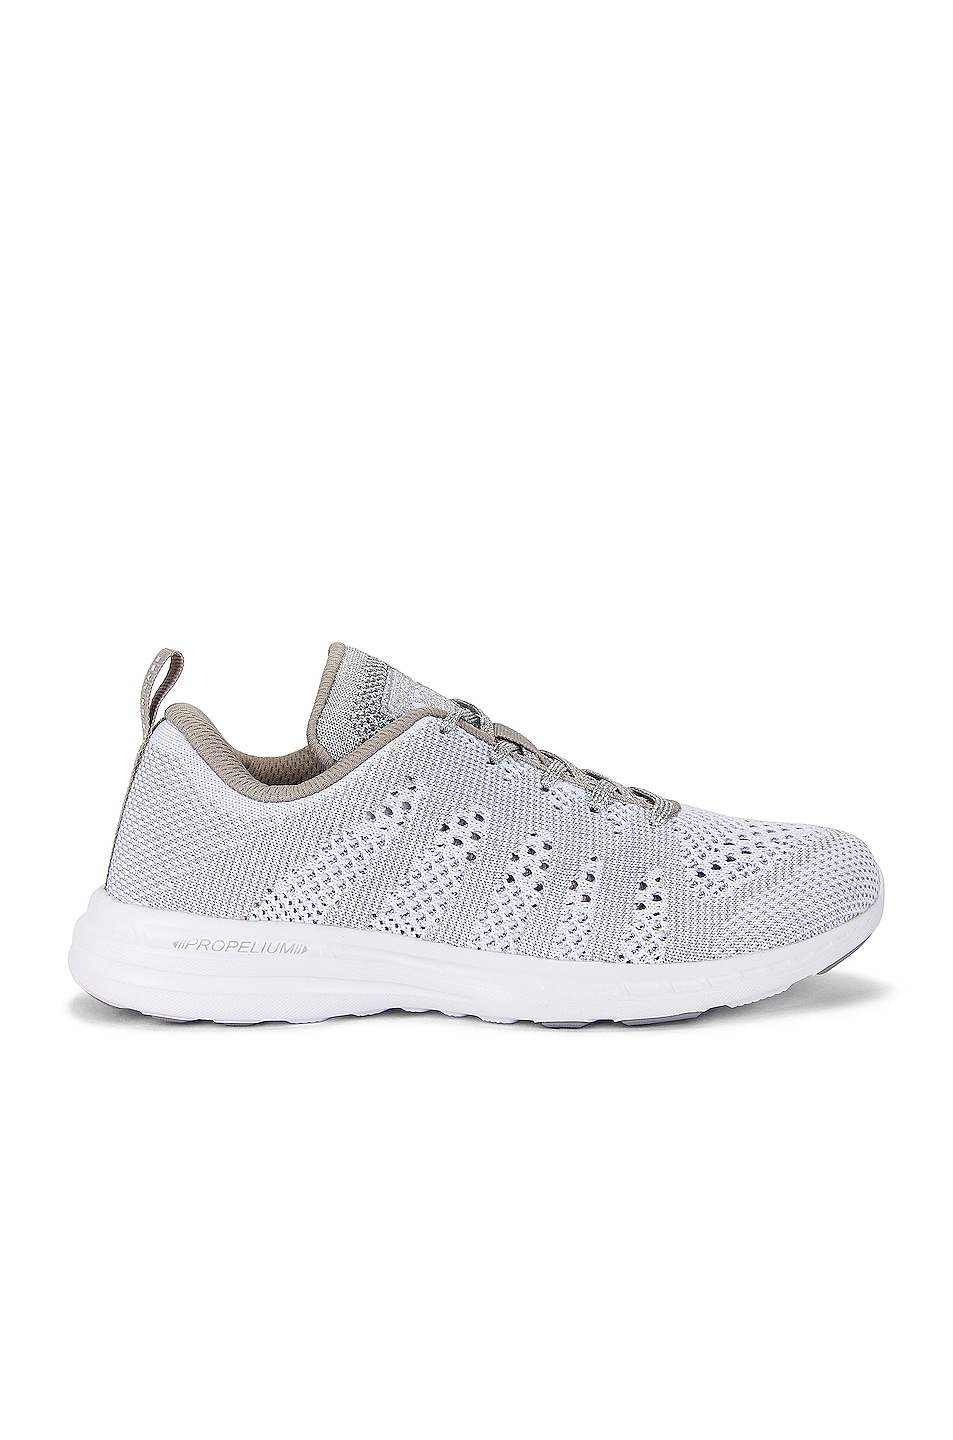 Image 1 of APL: Athletic Propulsion Labs Techloom Pro Sneaker in White & Metallic Silver